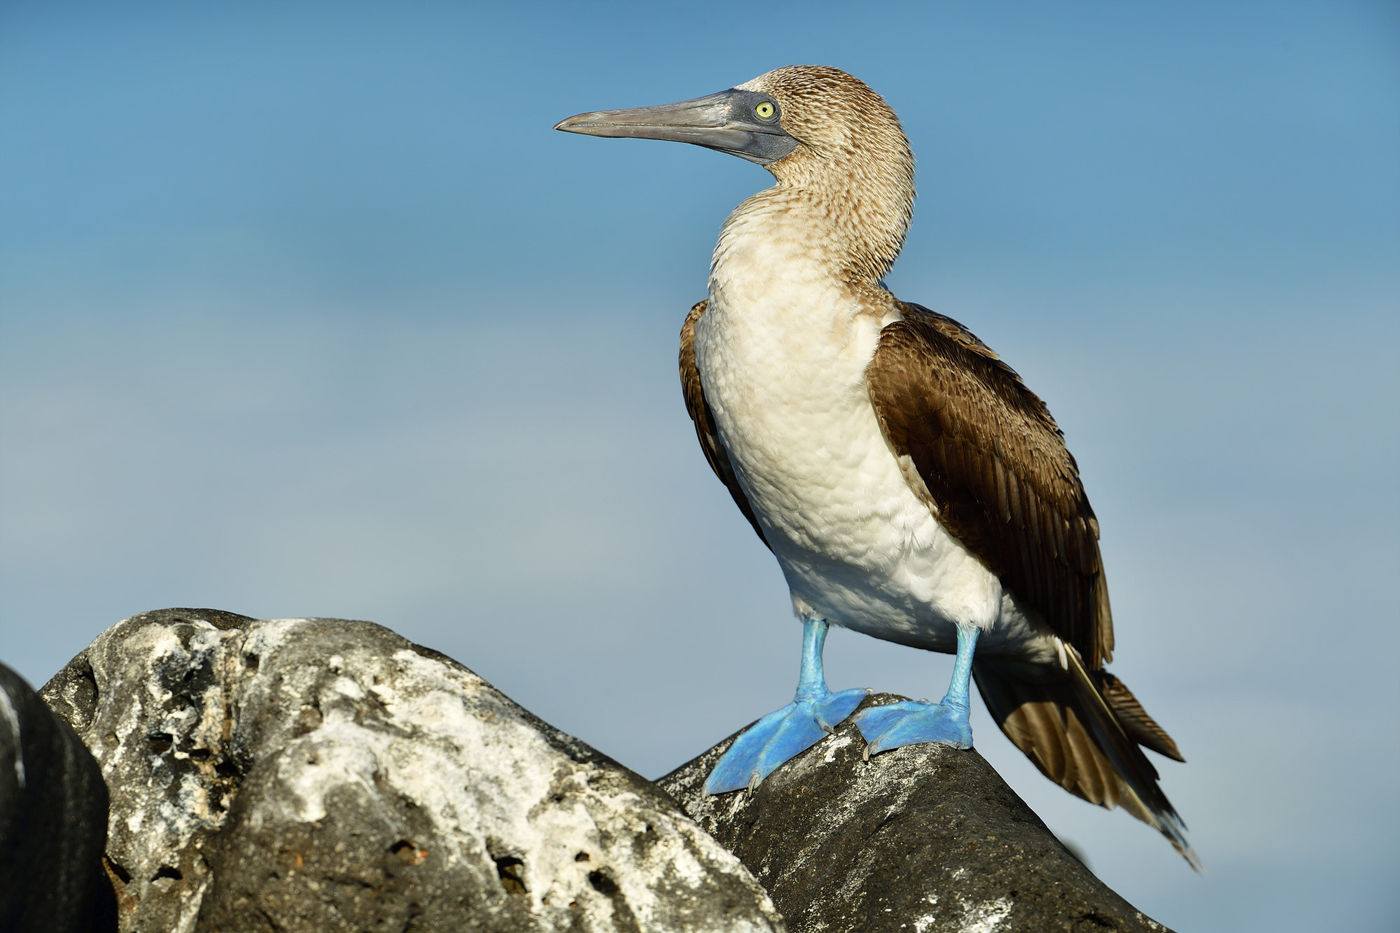 This booby occurs mainly in the tropical regions of The Pacific. © Yves Adams